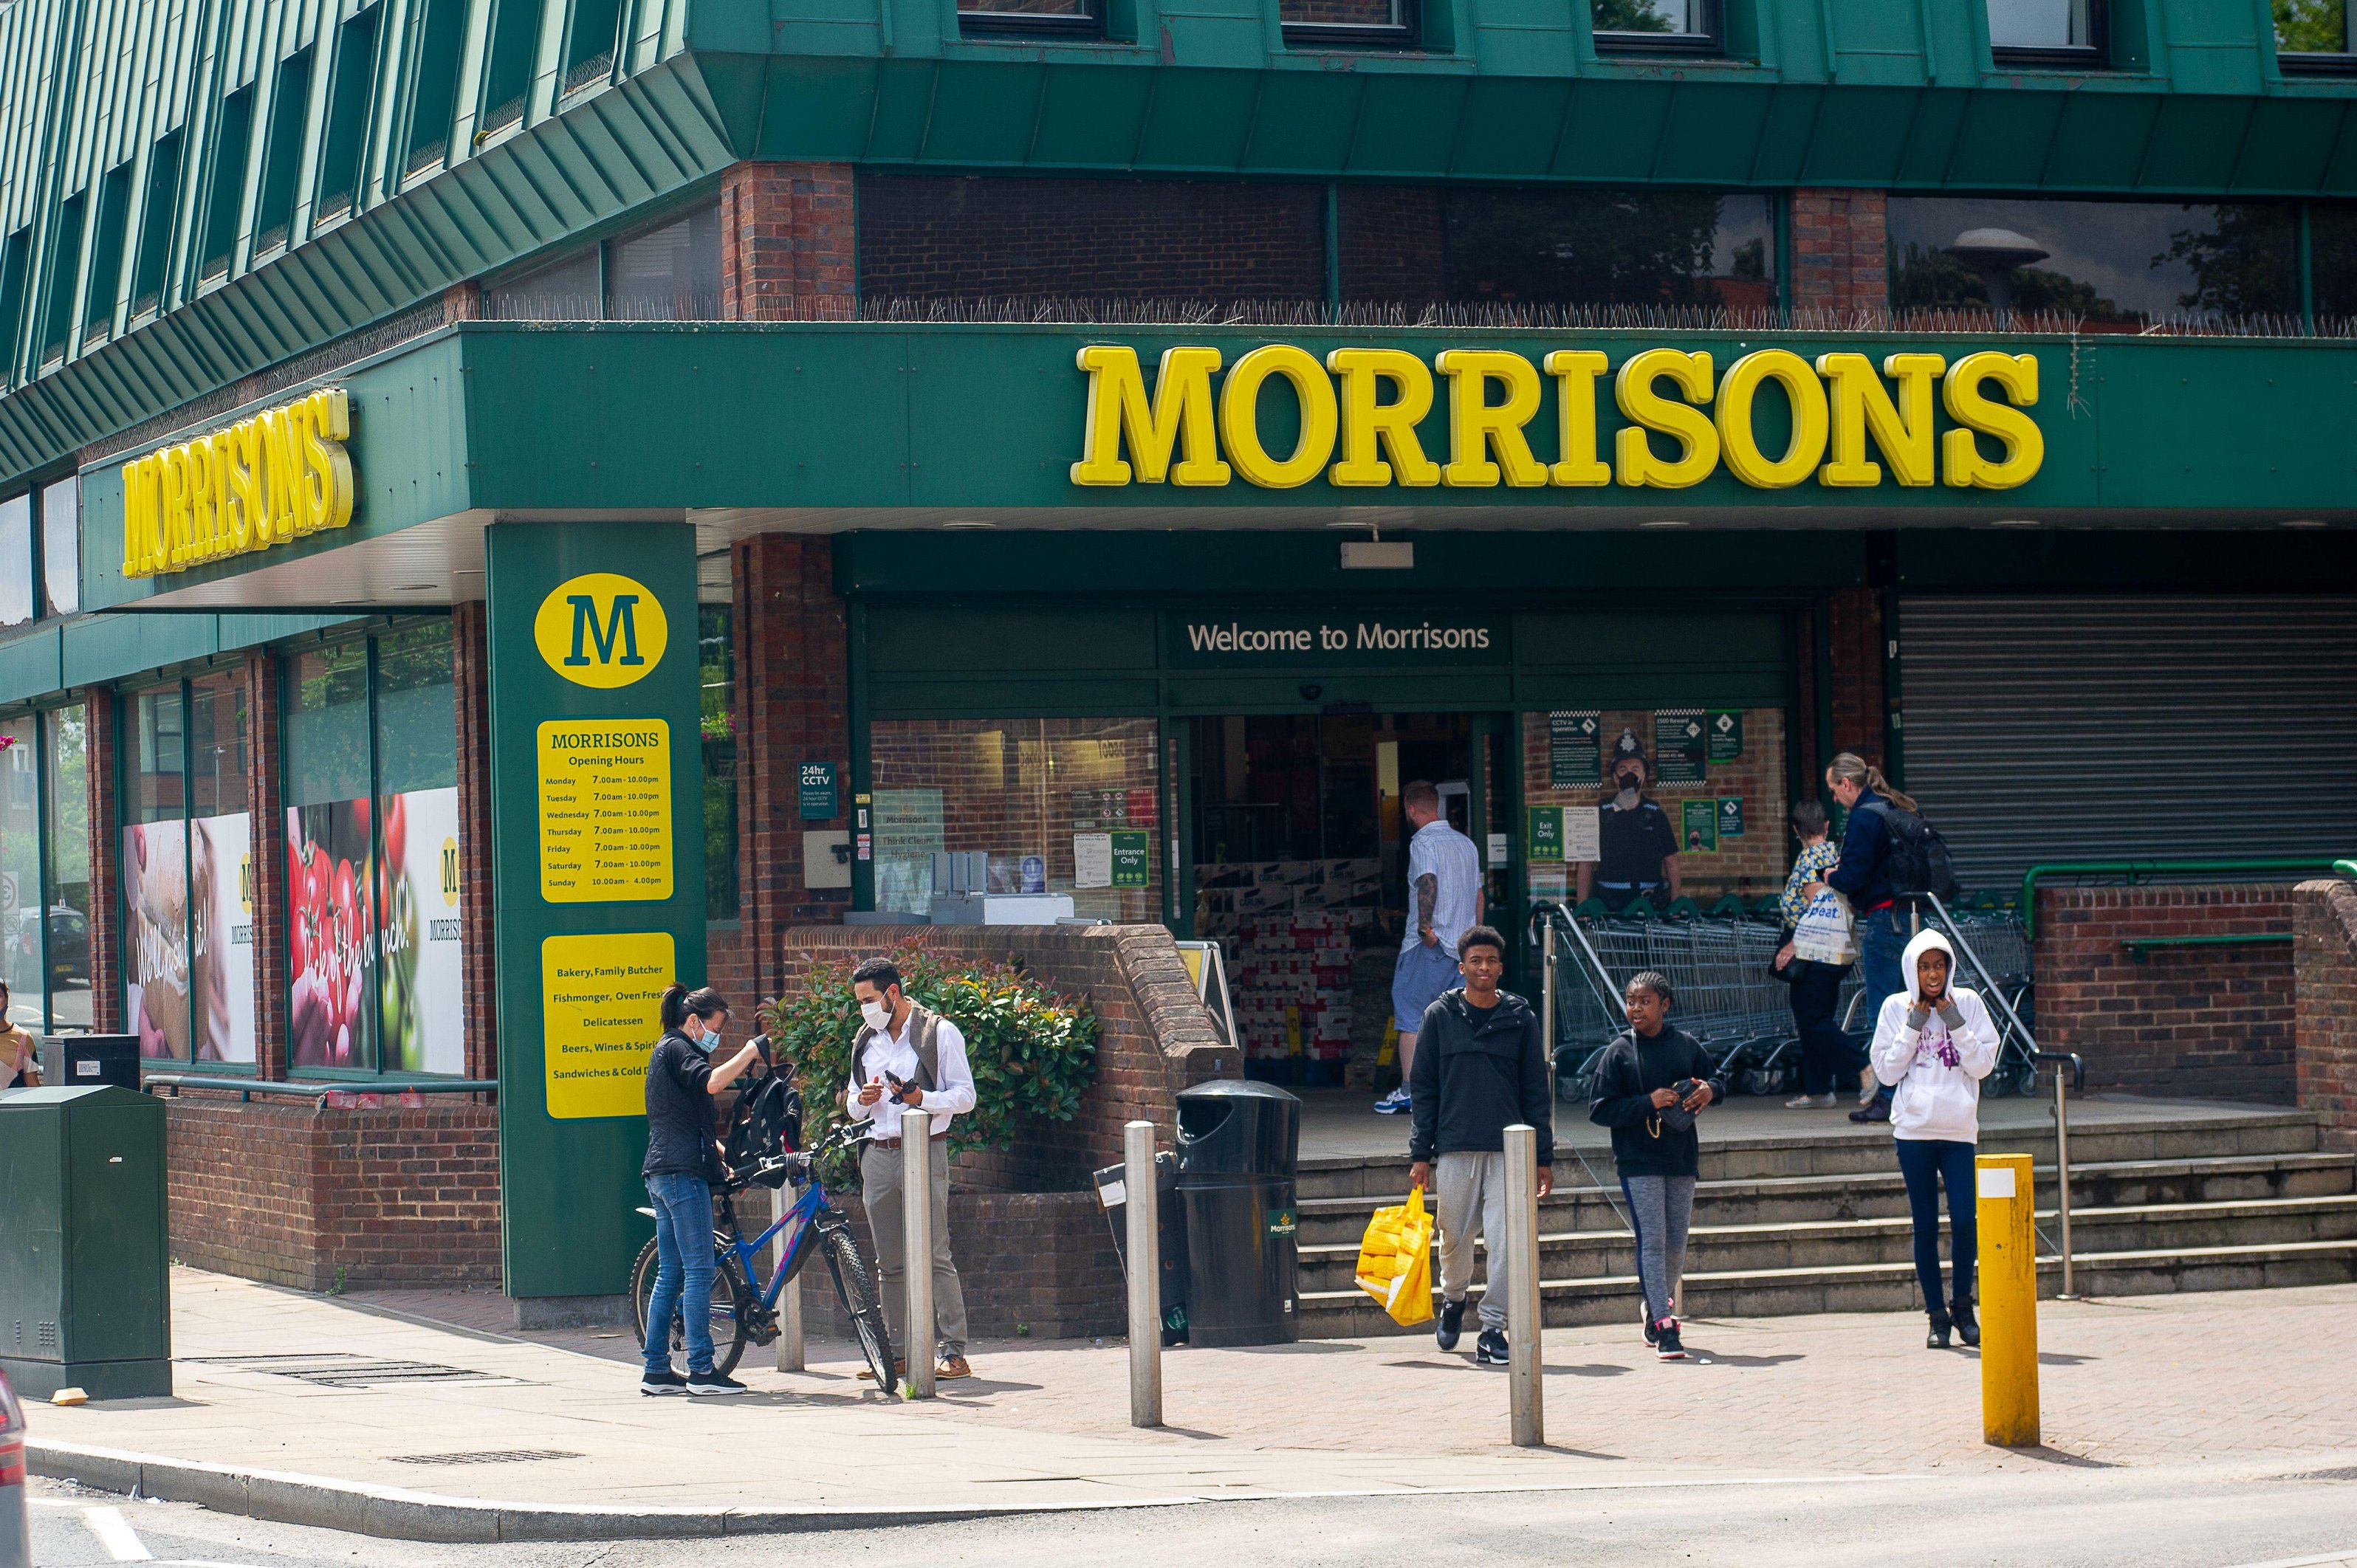 Morrisons More card users are entitled to cheaper offers in store